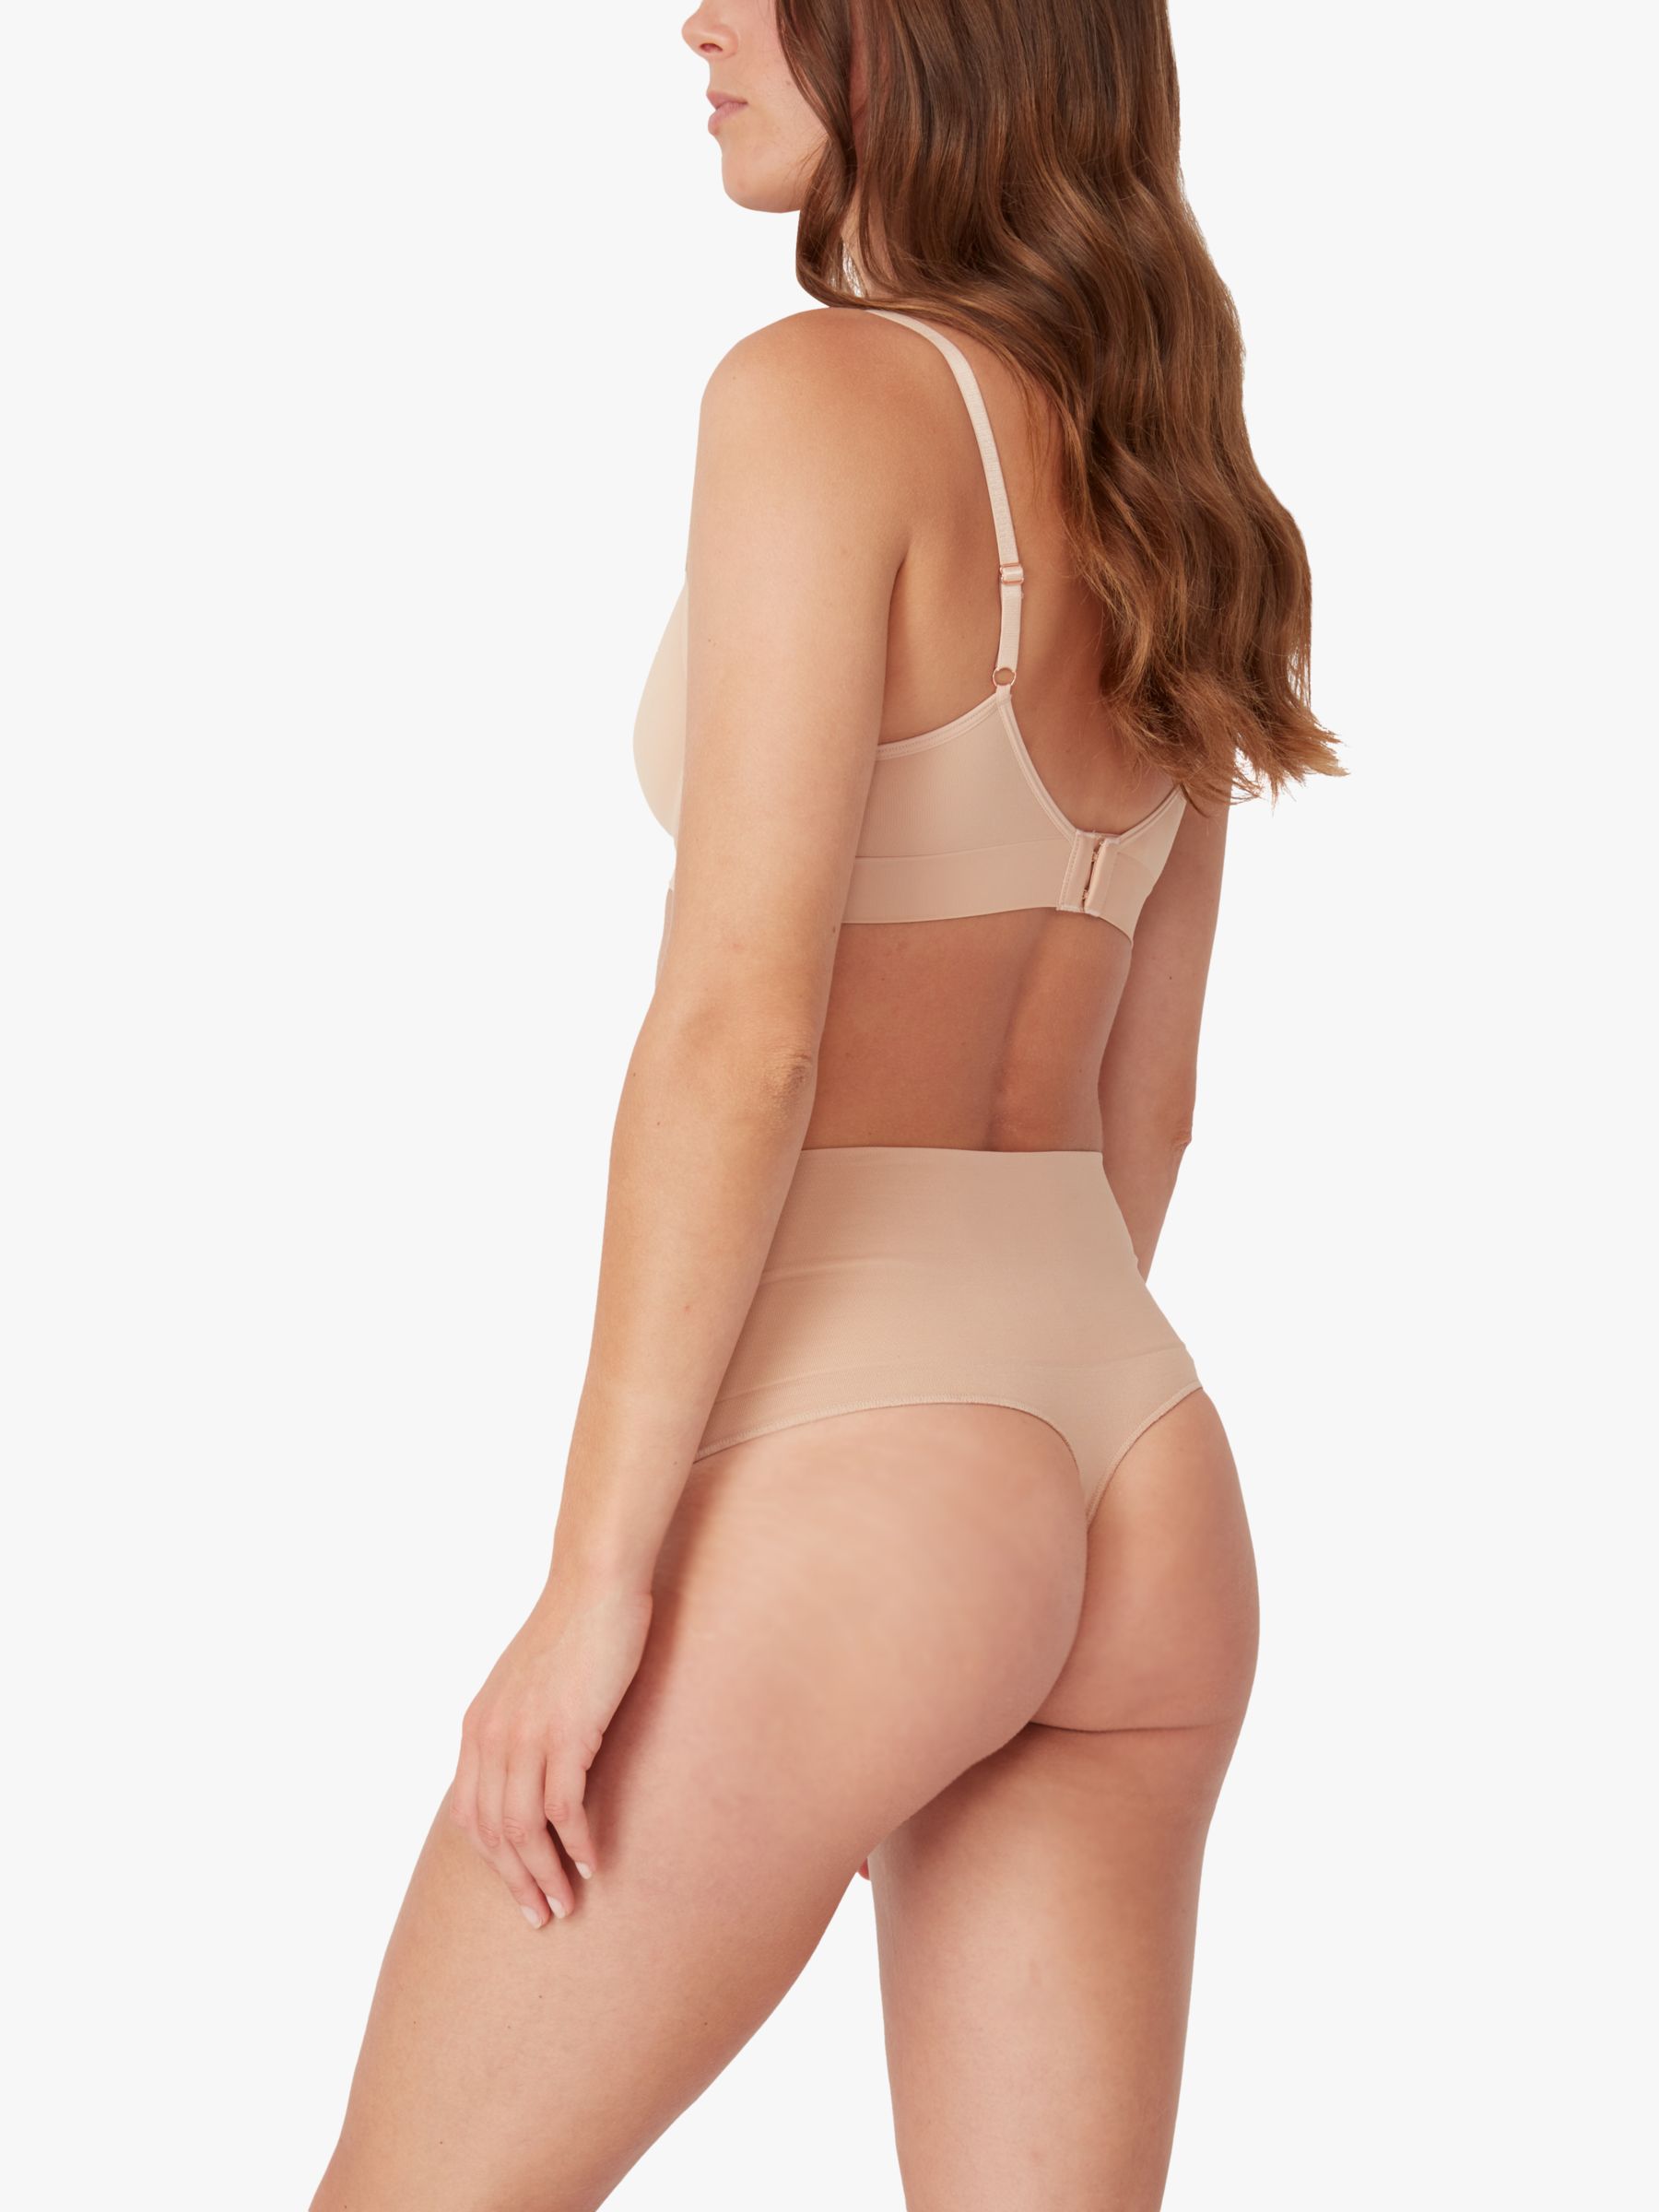 Buy Ambra Seamless Smoothies G String Briefs, Pack of 2 Online at johnlewis.com